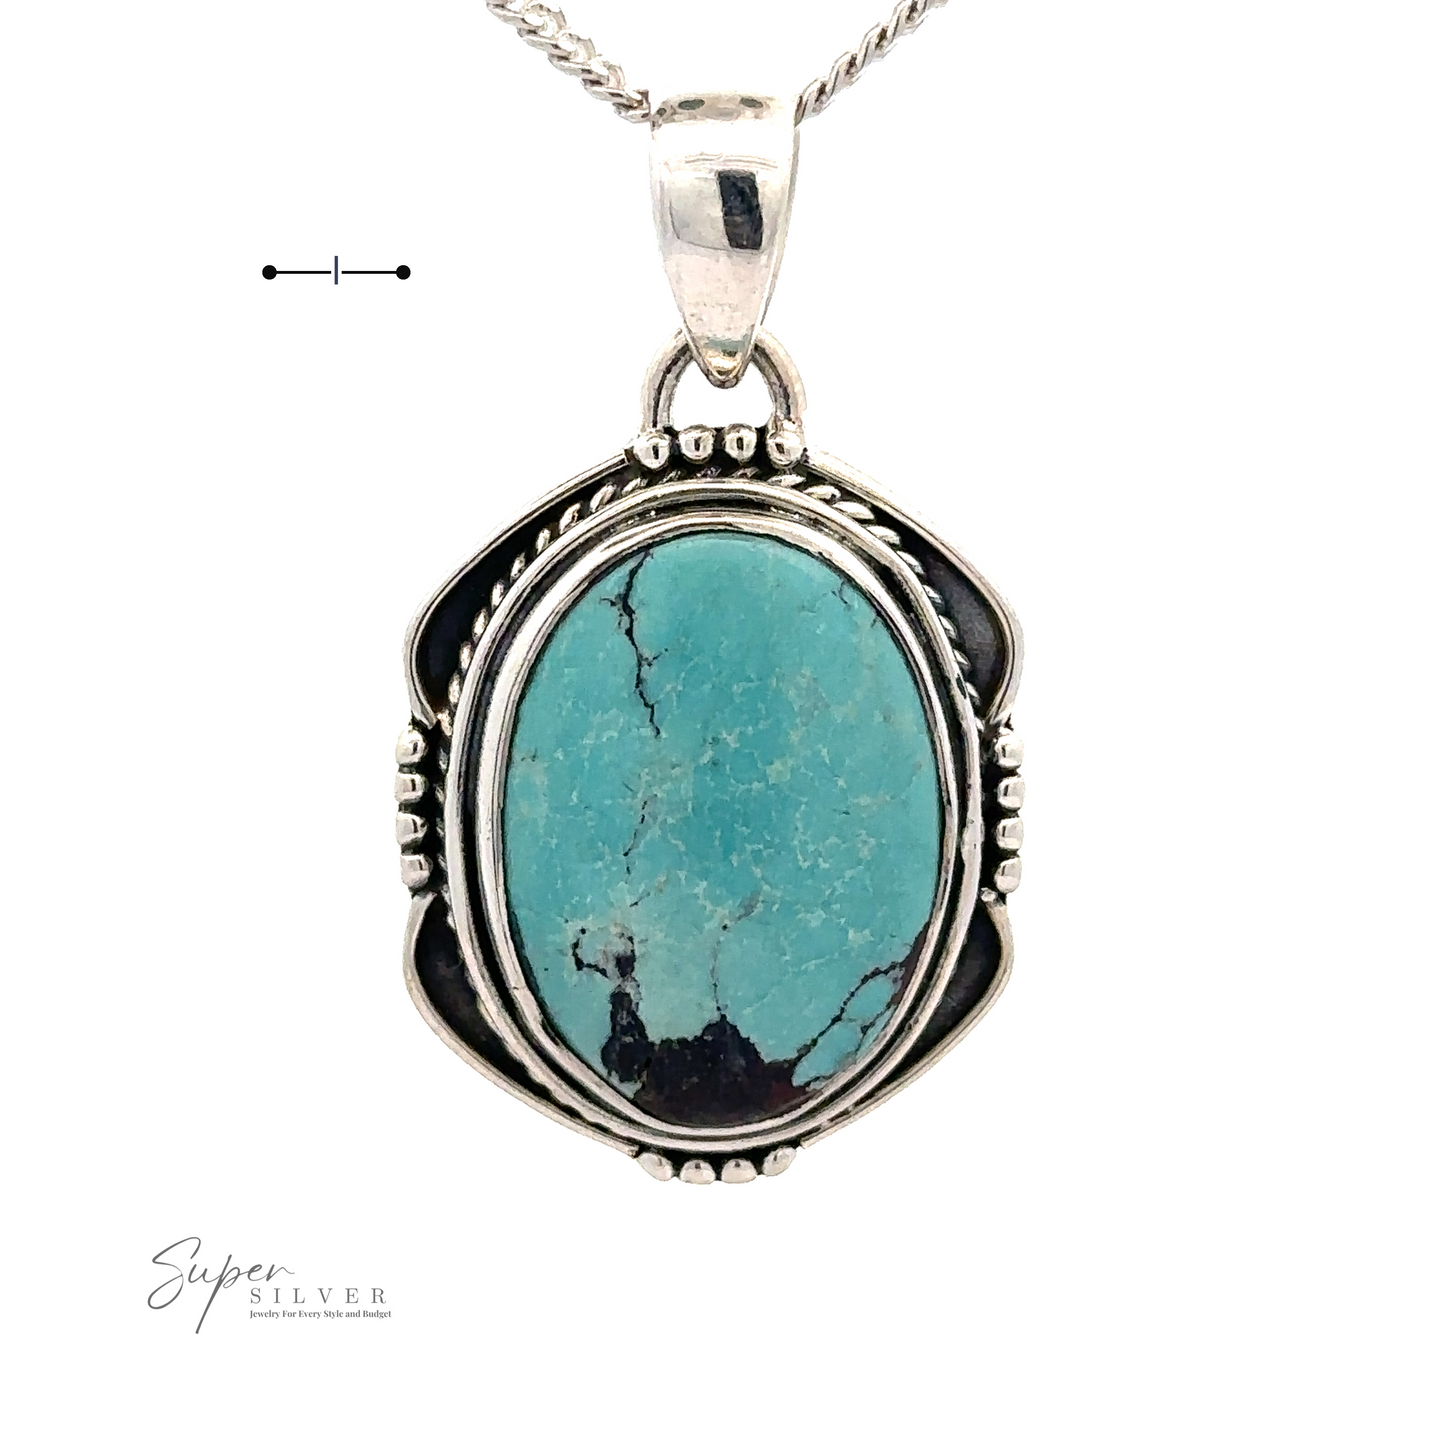 
                  
                    A Natural Turquoise Pendant with an Oval Shield Setting featuring an oval natural turquoise stone with black veining, showcased against a white background. The handmade piece boasts intricate silver detailing around the stone.
                  
                